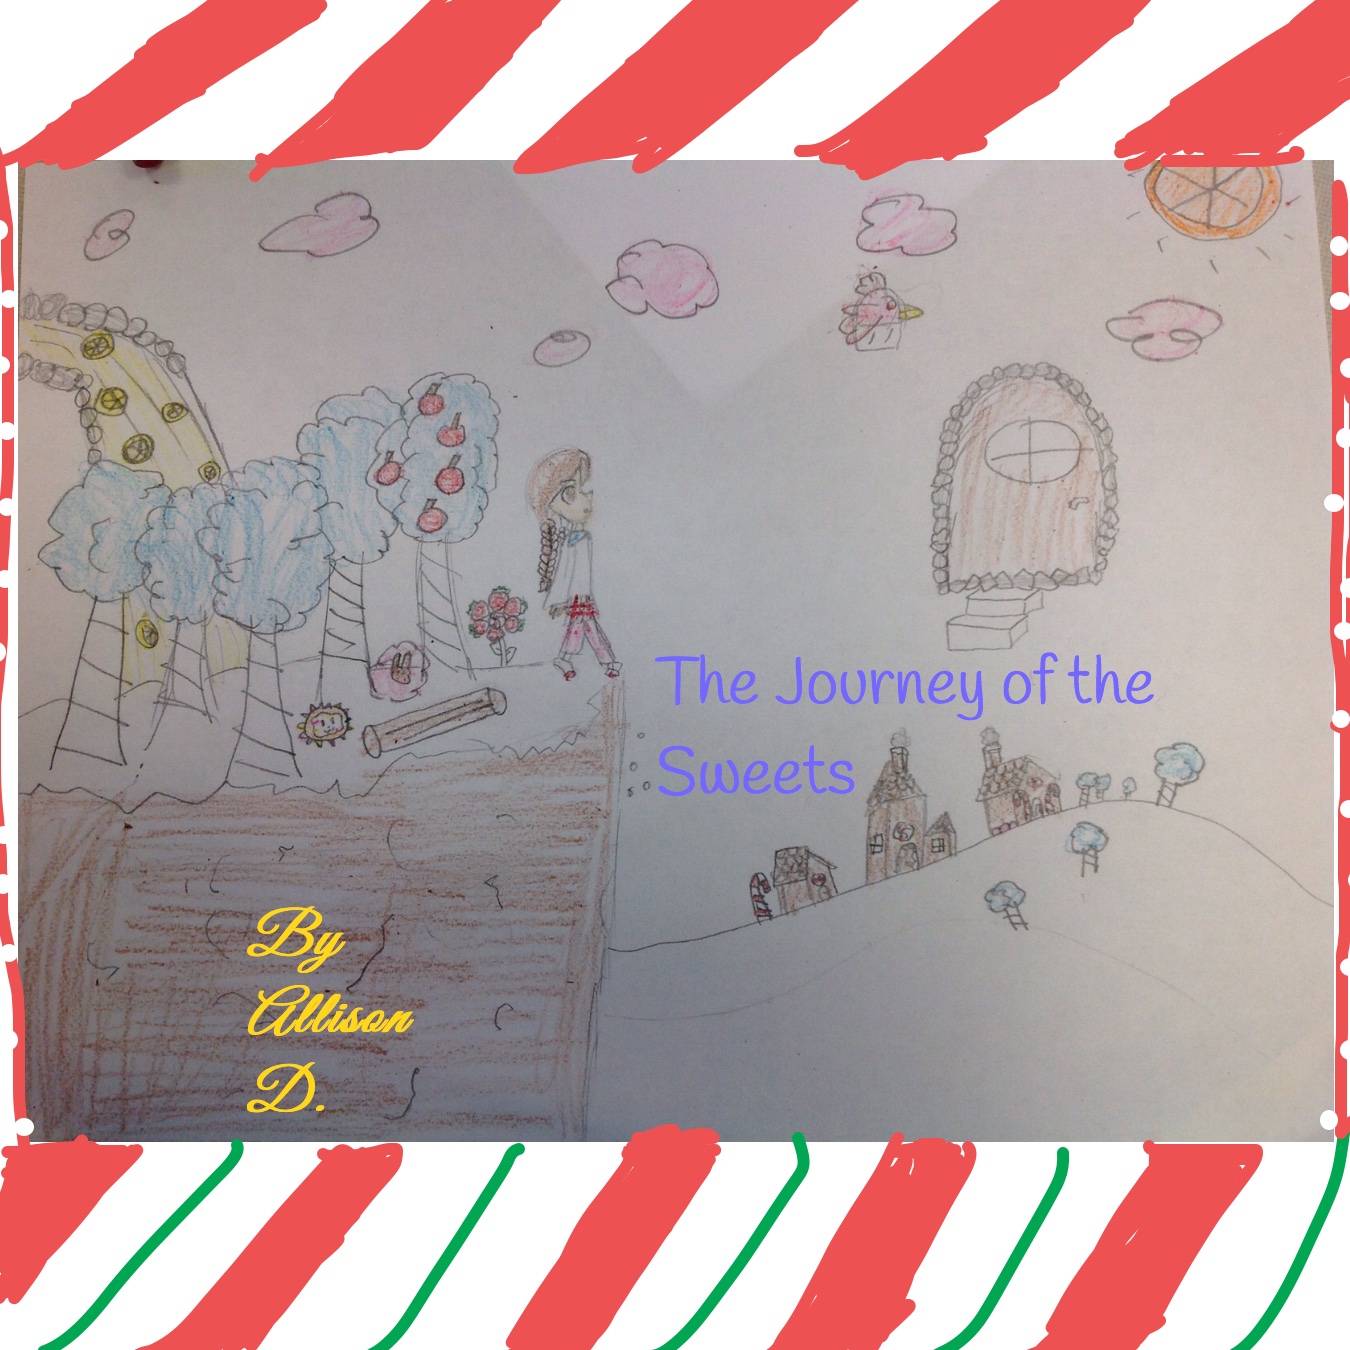 The Journey of the Sweets by Allison D